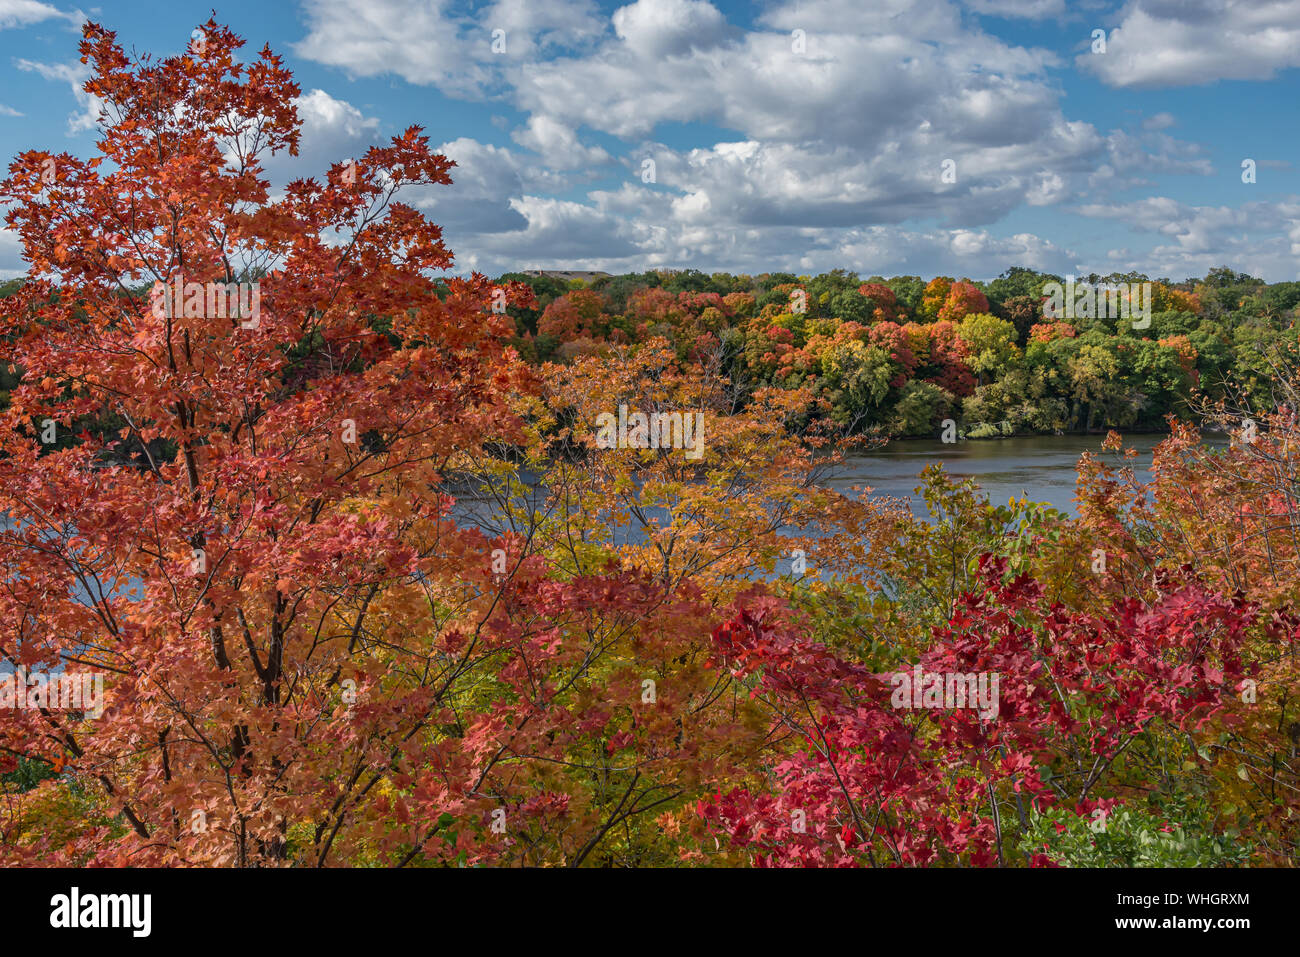 Sunny fall scene of colorful orange, red, yellow, and green trees with blue sky and white clouds above the Mississippi River. Stock Photo